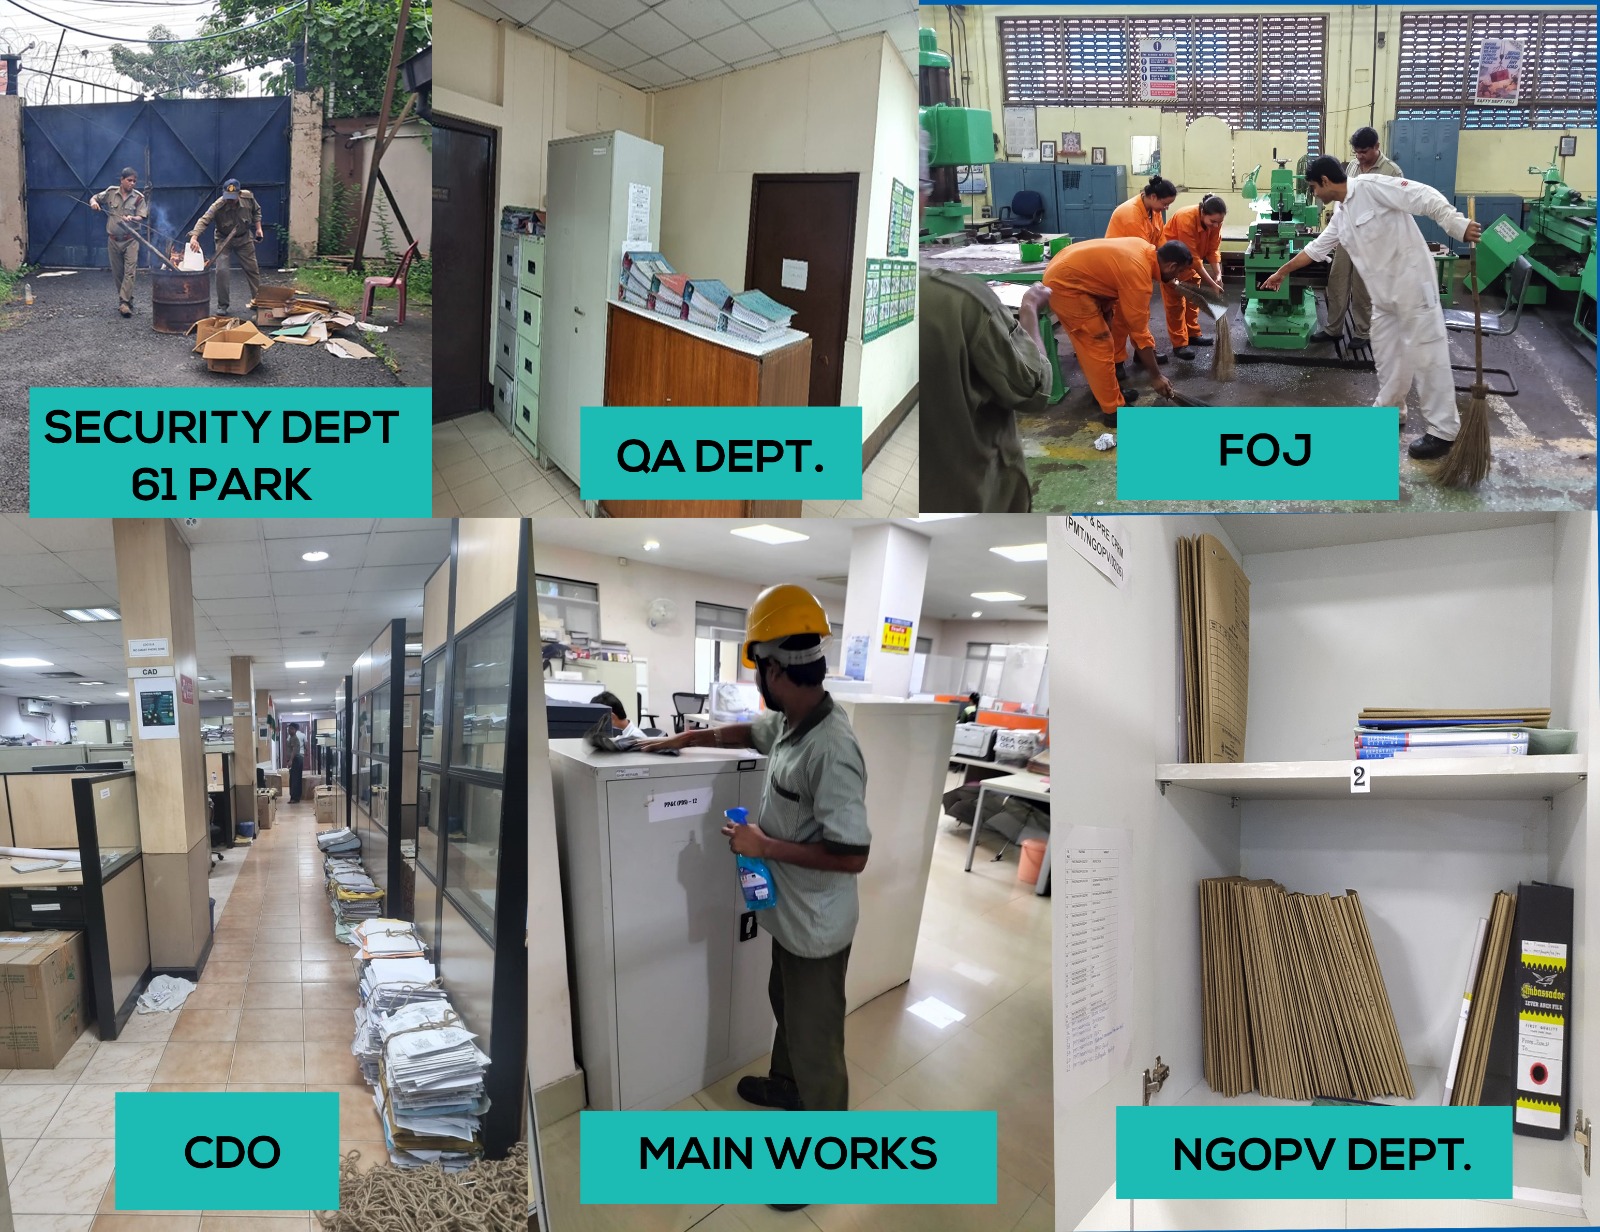 Weeding out of old files & equipments, and cleaning furniture & almirah across departments on 03 Oct 23